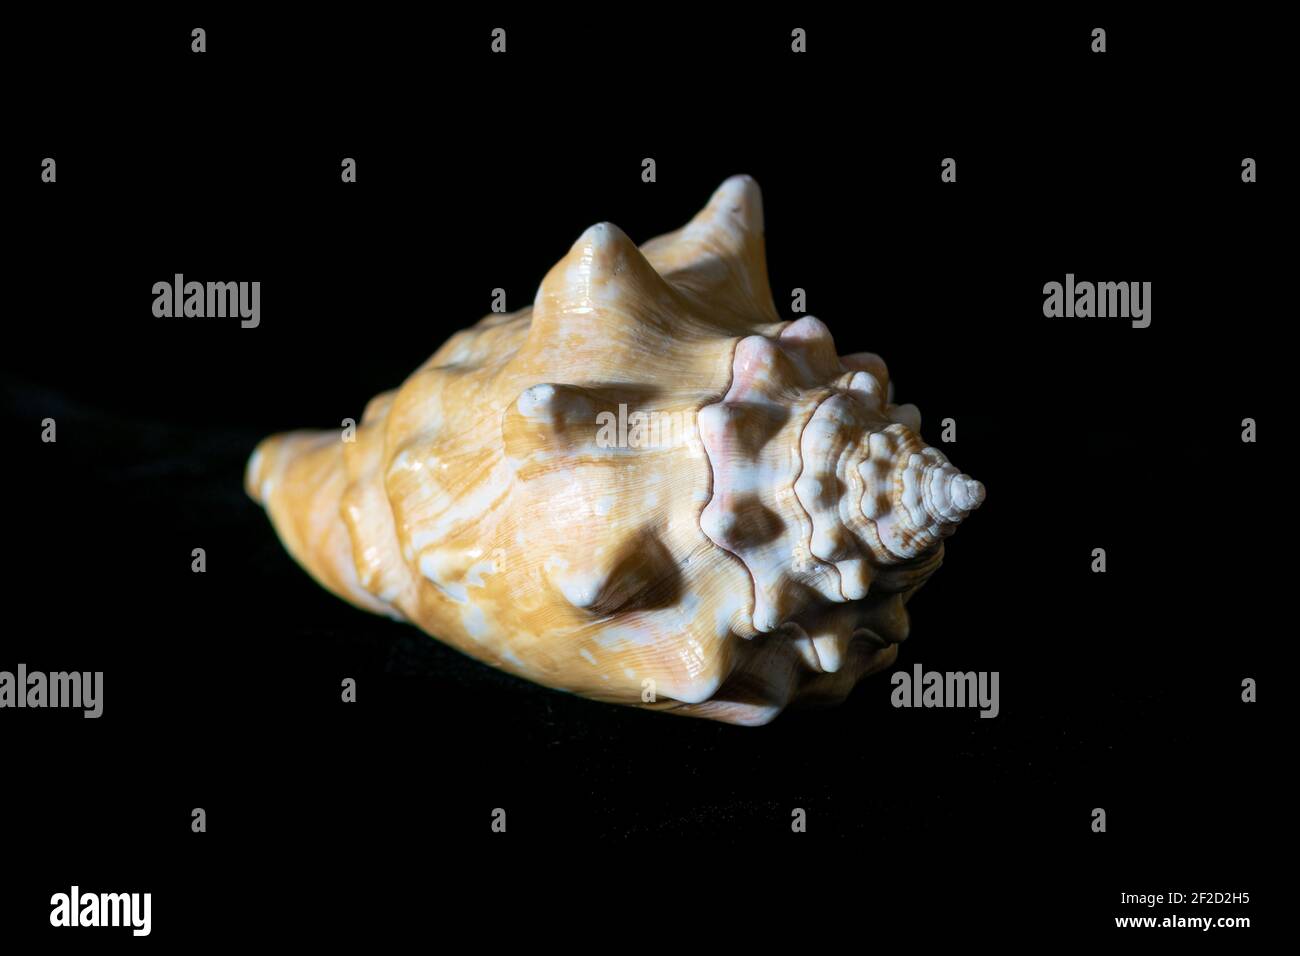 Strombus latus (Gmelin, 1791)  collected on beach at Sal, Santa Maria, Cape Verde Islands, shell from ocean snail on black background Stock Photo